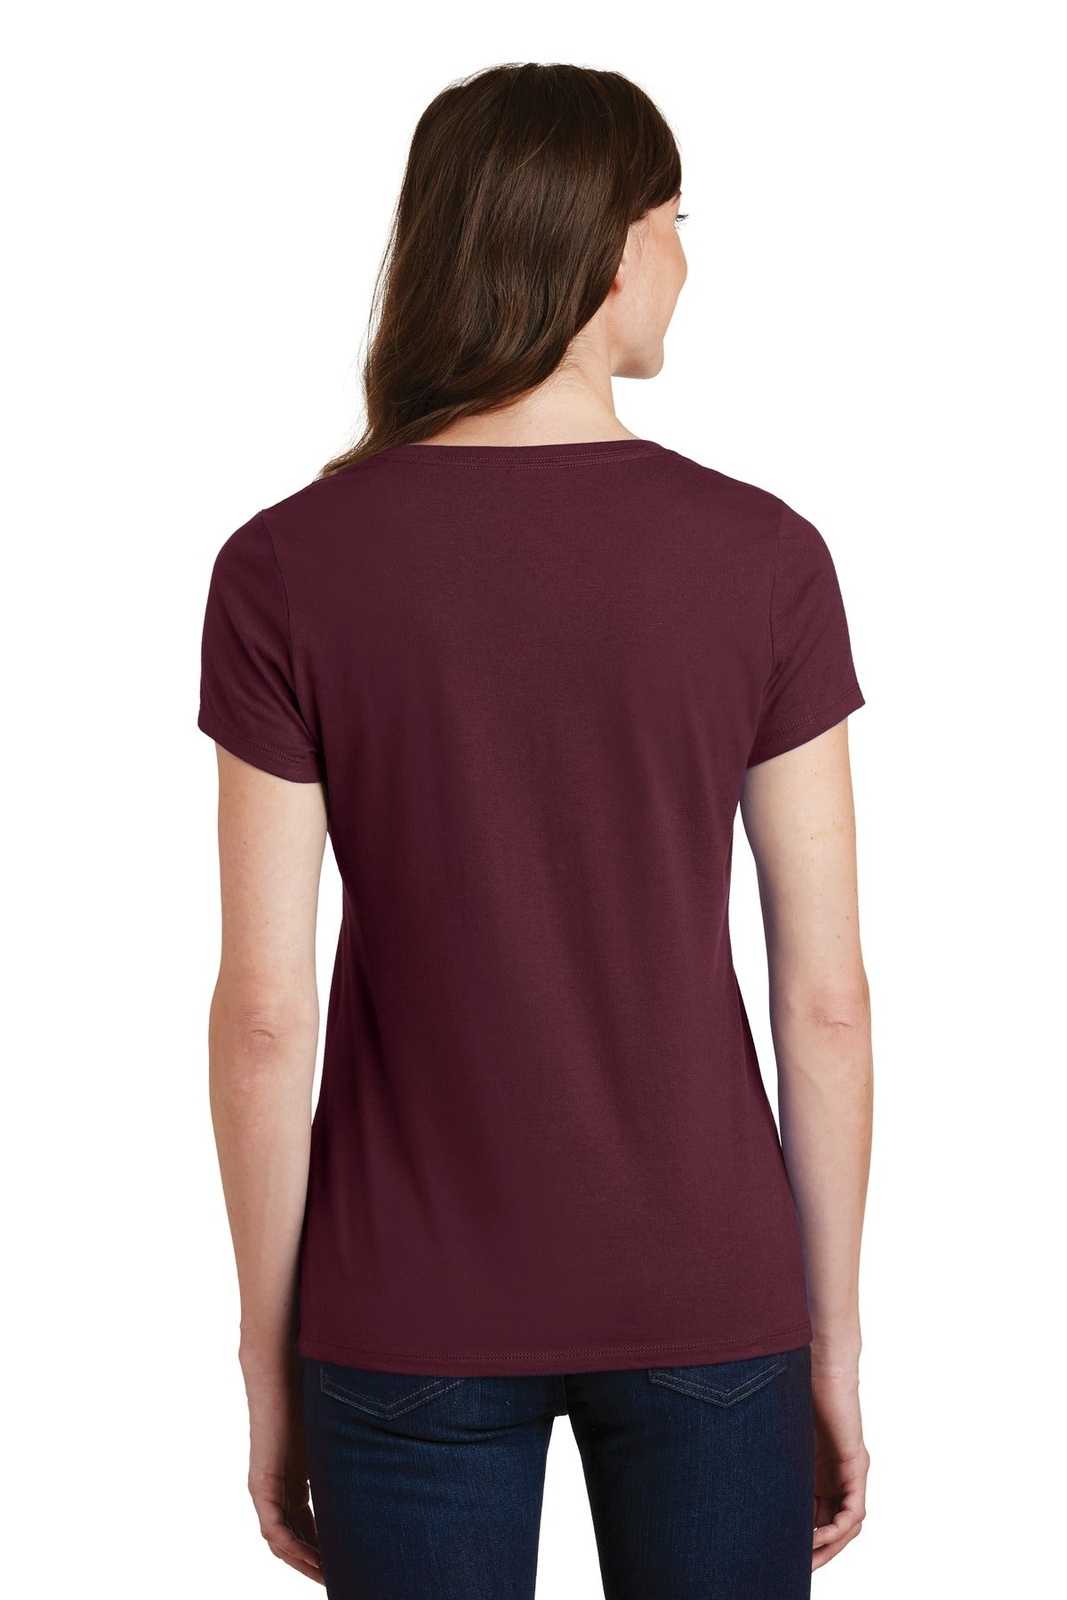 Port &amp; Company LPC450V Ladies Fan Favorite V-Neck Tee - Athletic Maroon - HIT a Double - 2